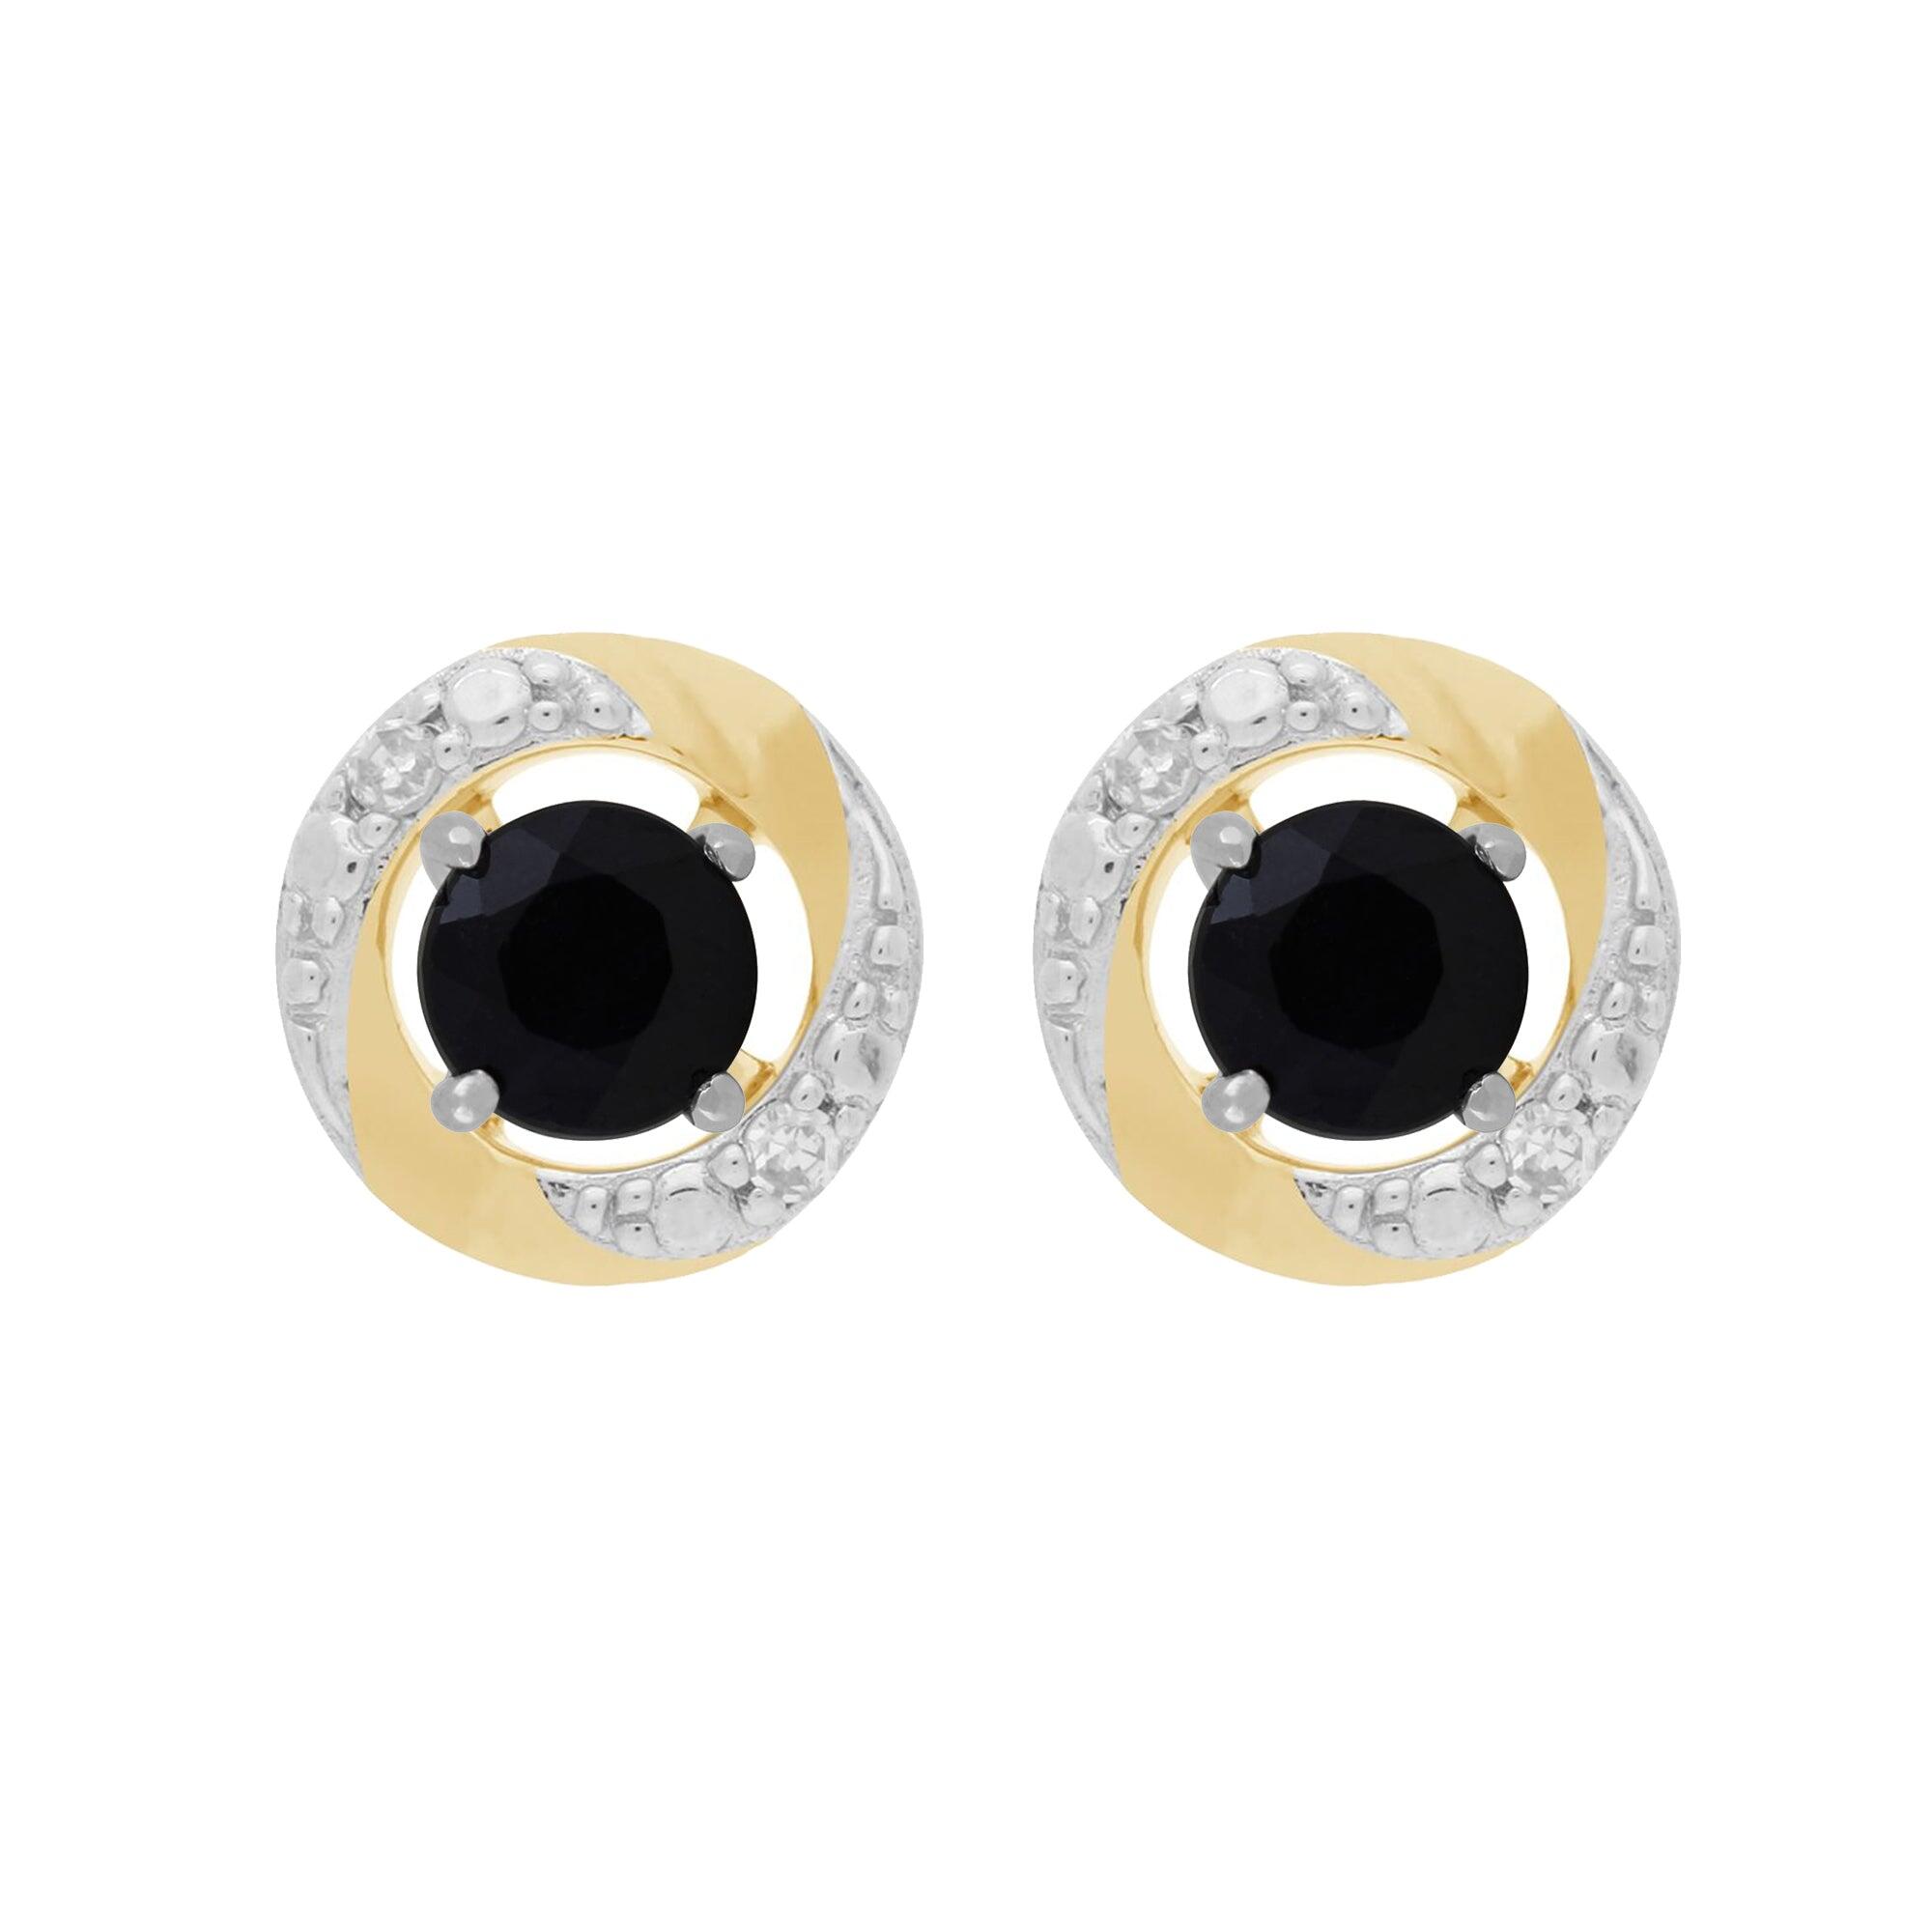 9ct White Gold Dark Blue Sapphire Studs with Detachable Diamond Halo Ear Jacket in 9ct Yellow Gold